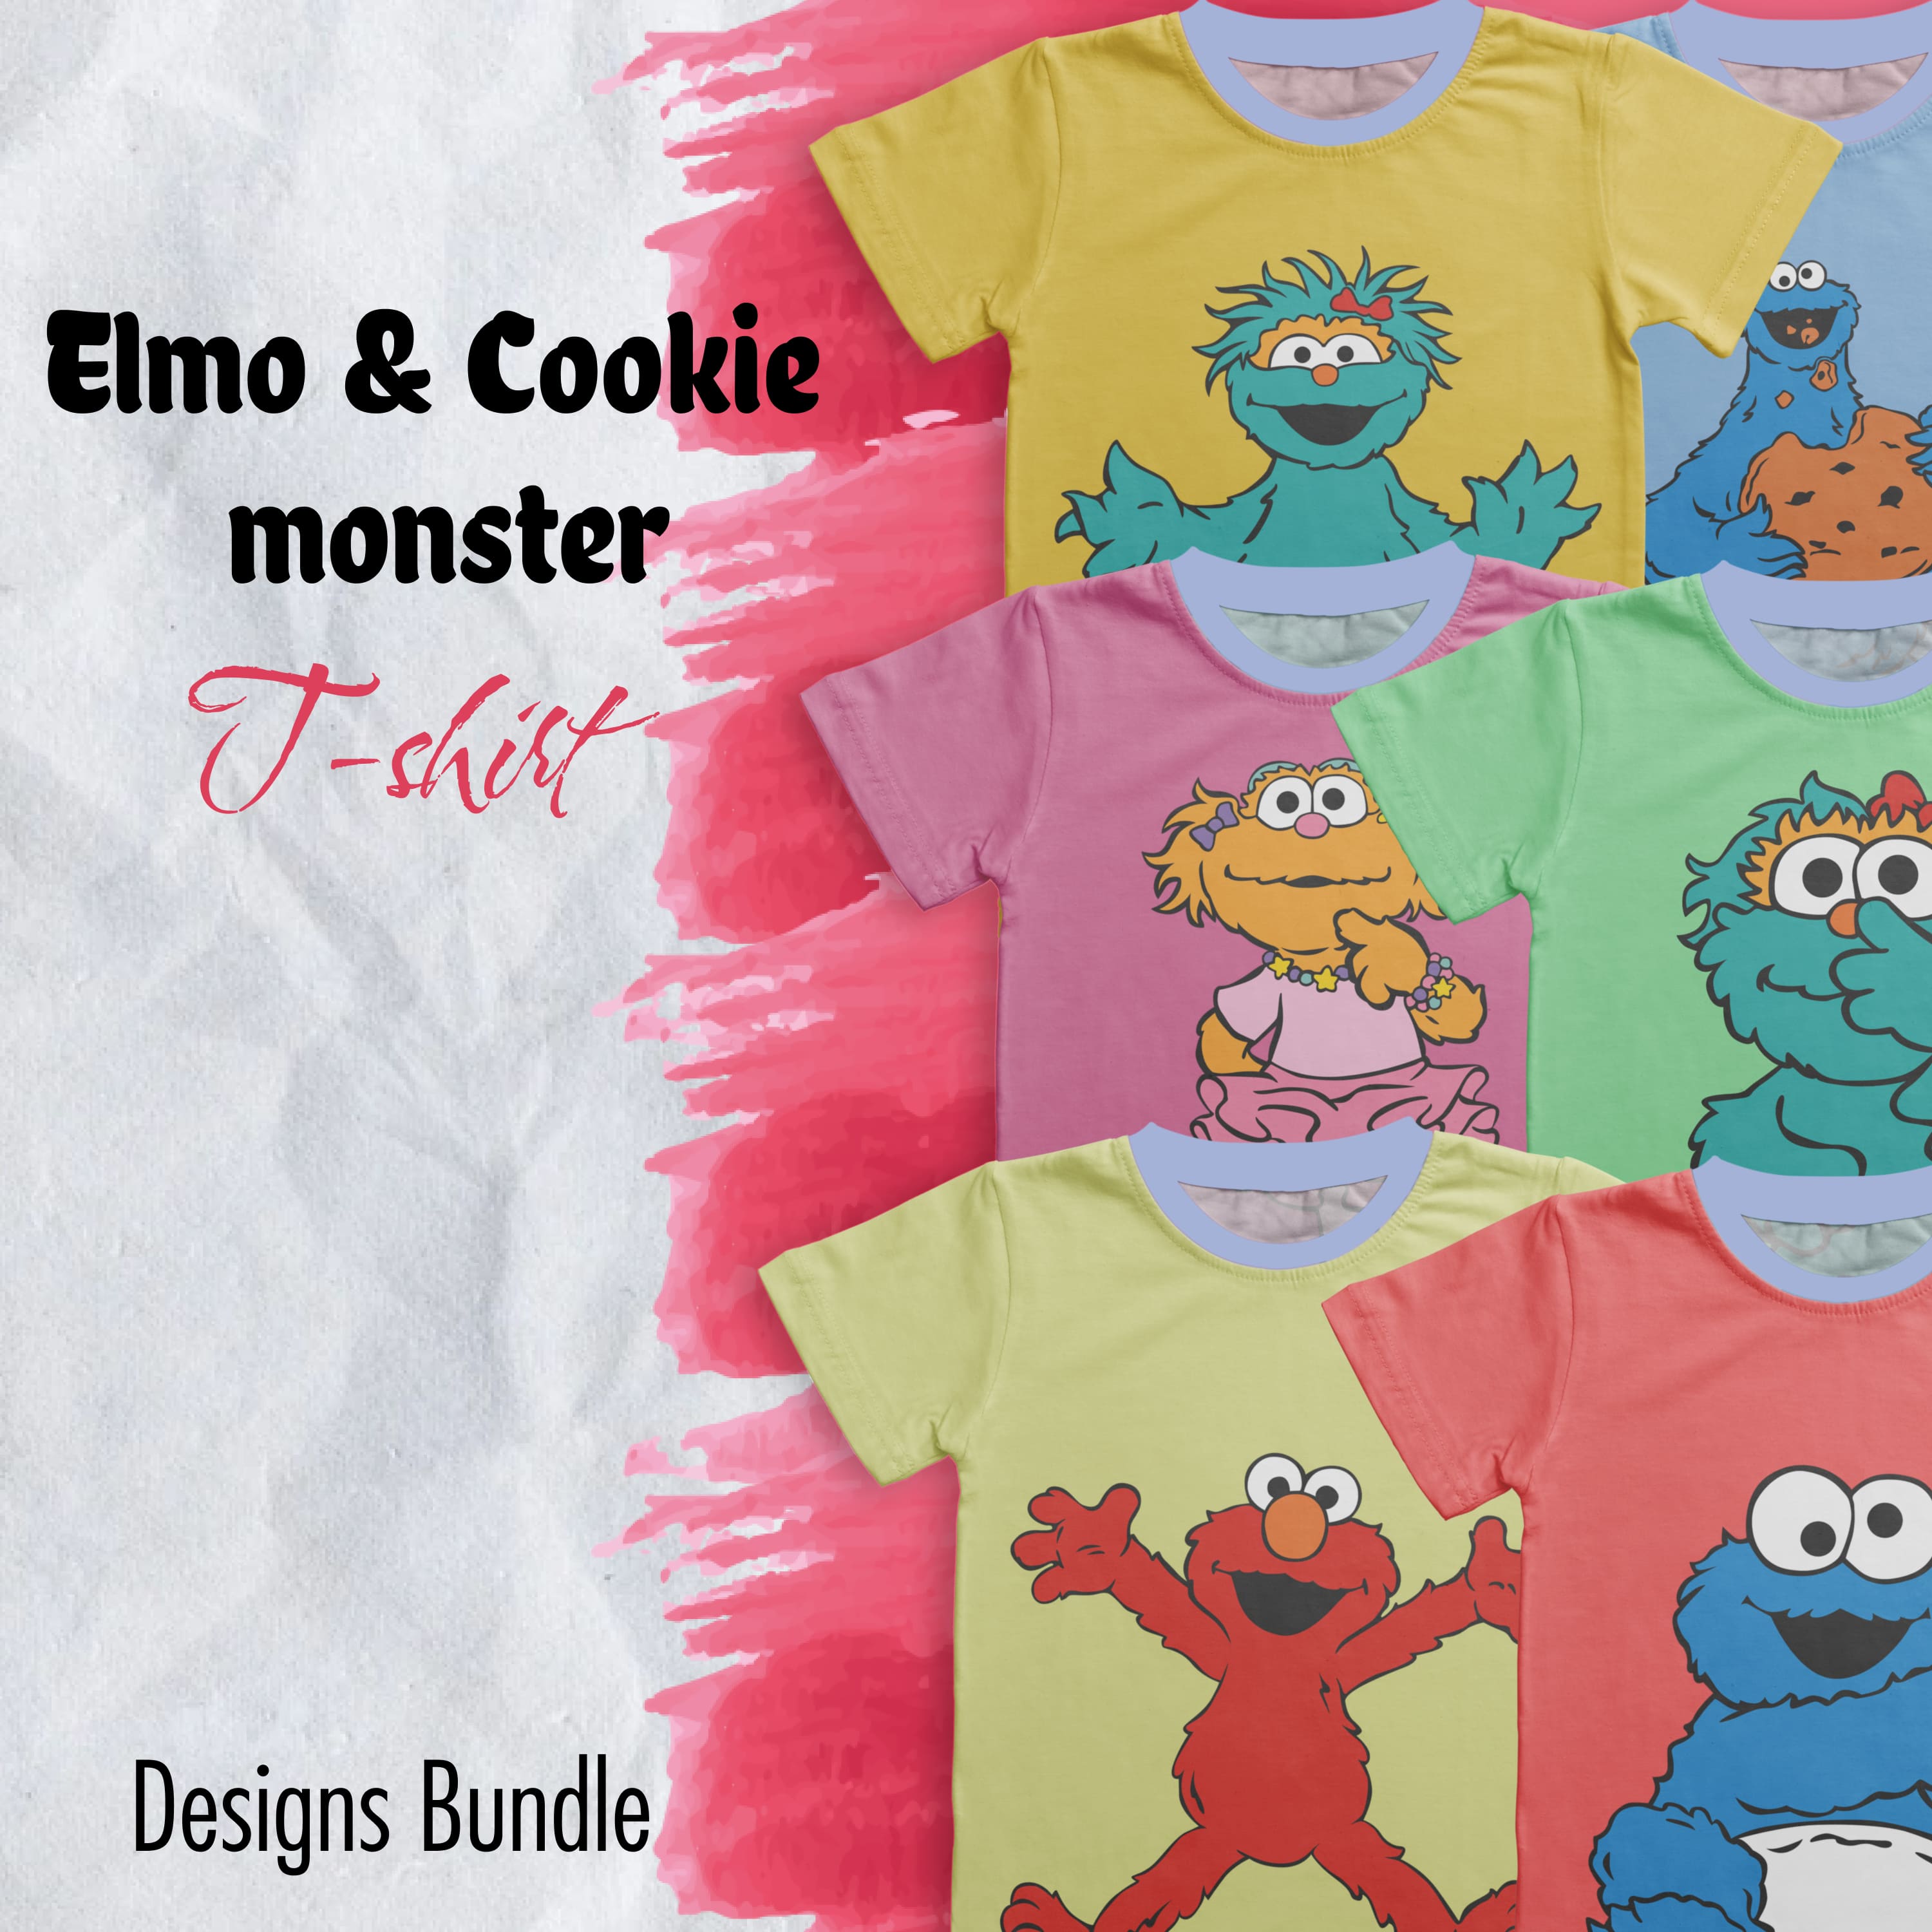 Elmo And Cookie Monster T-shirt Designs Bundle.